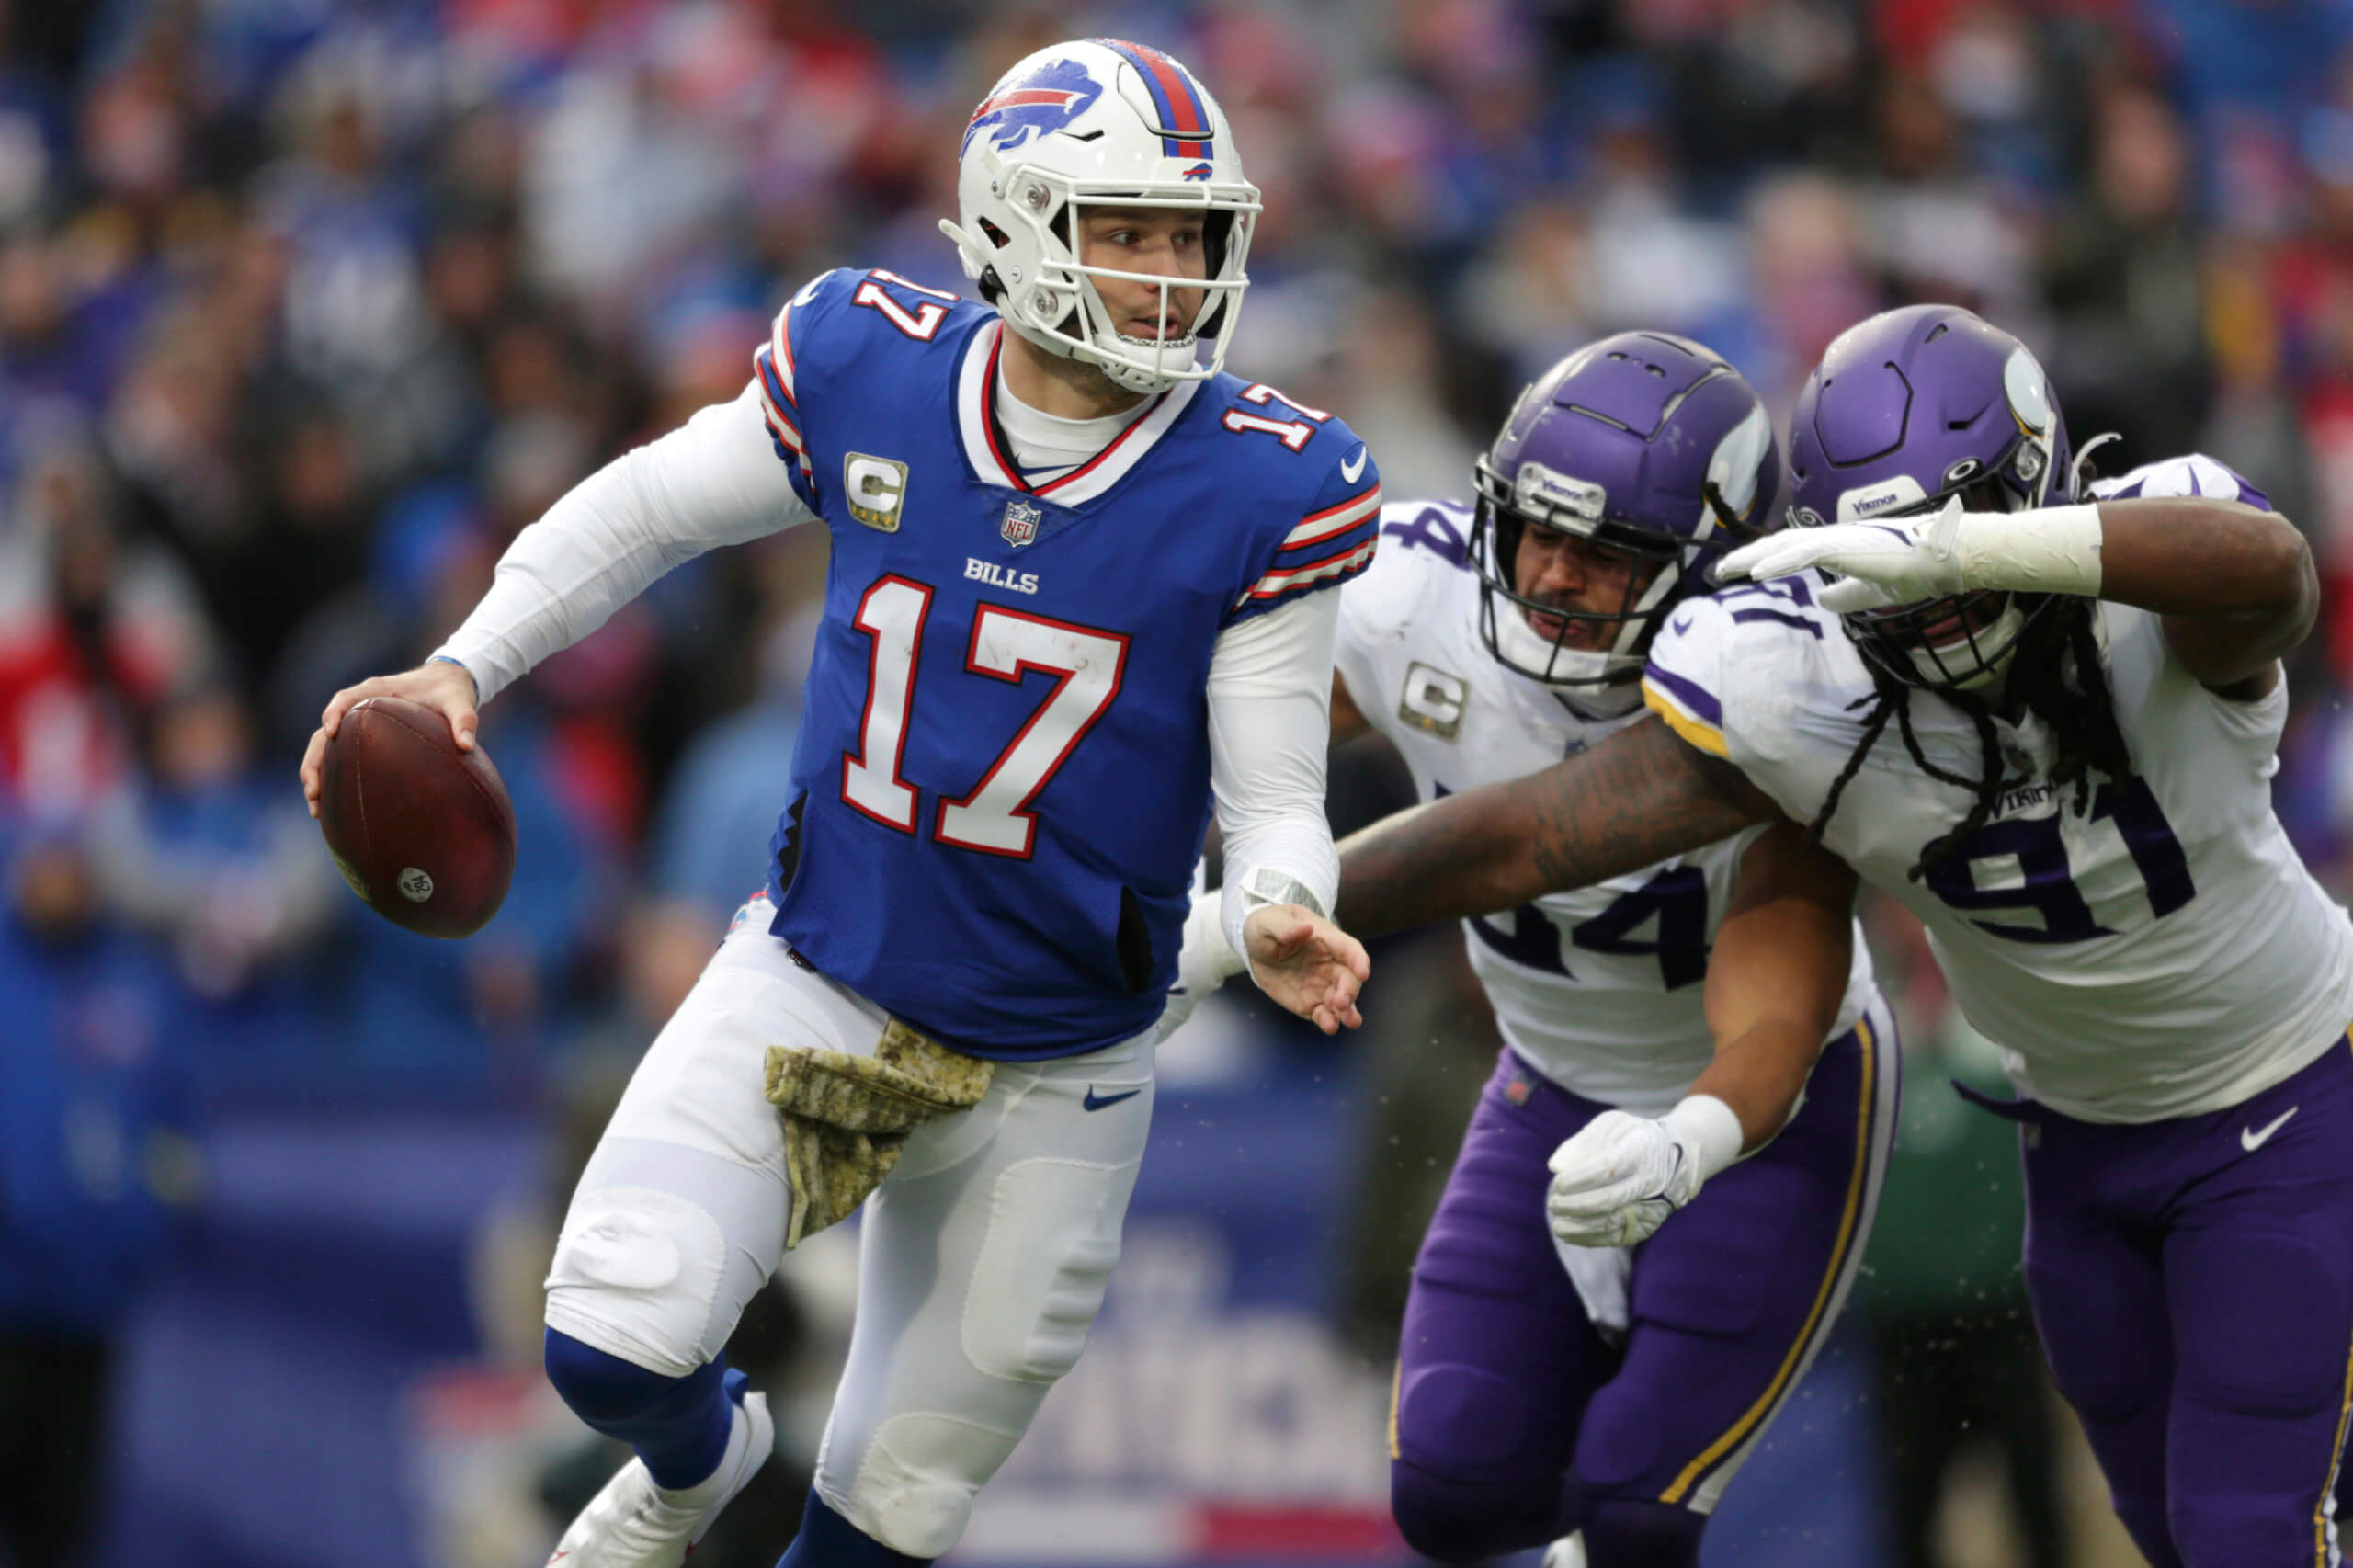 5 takeaways from the Buffalo Bills befuddling collapse against the